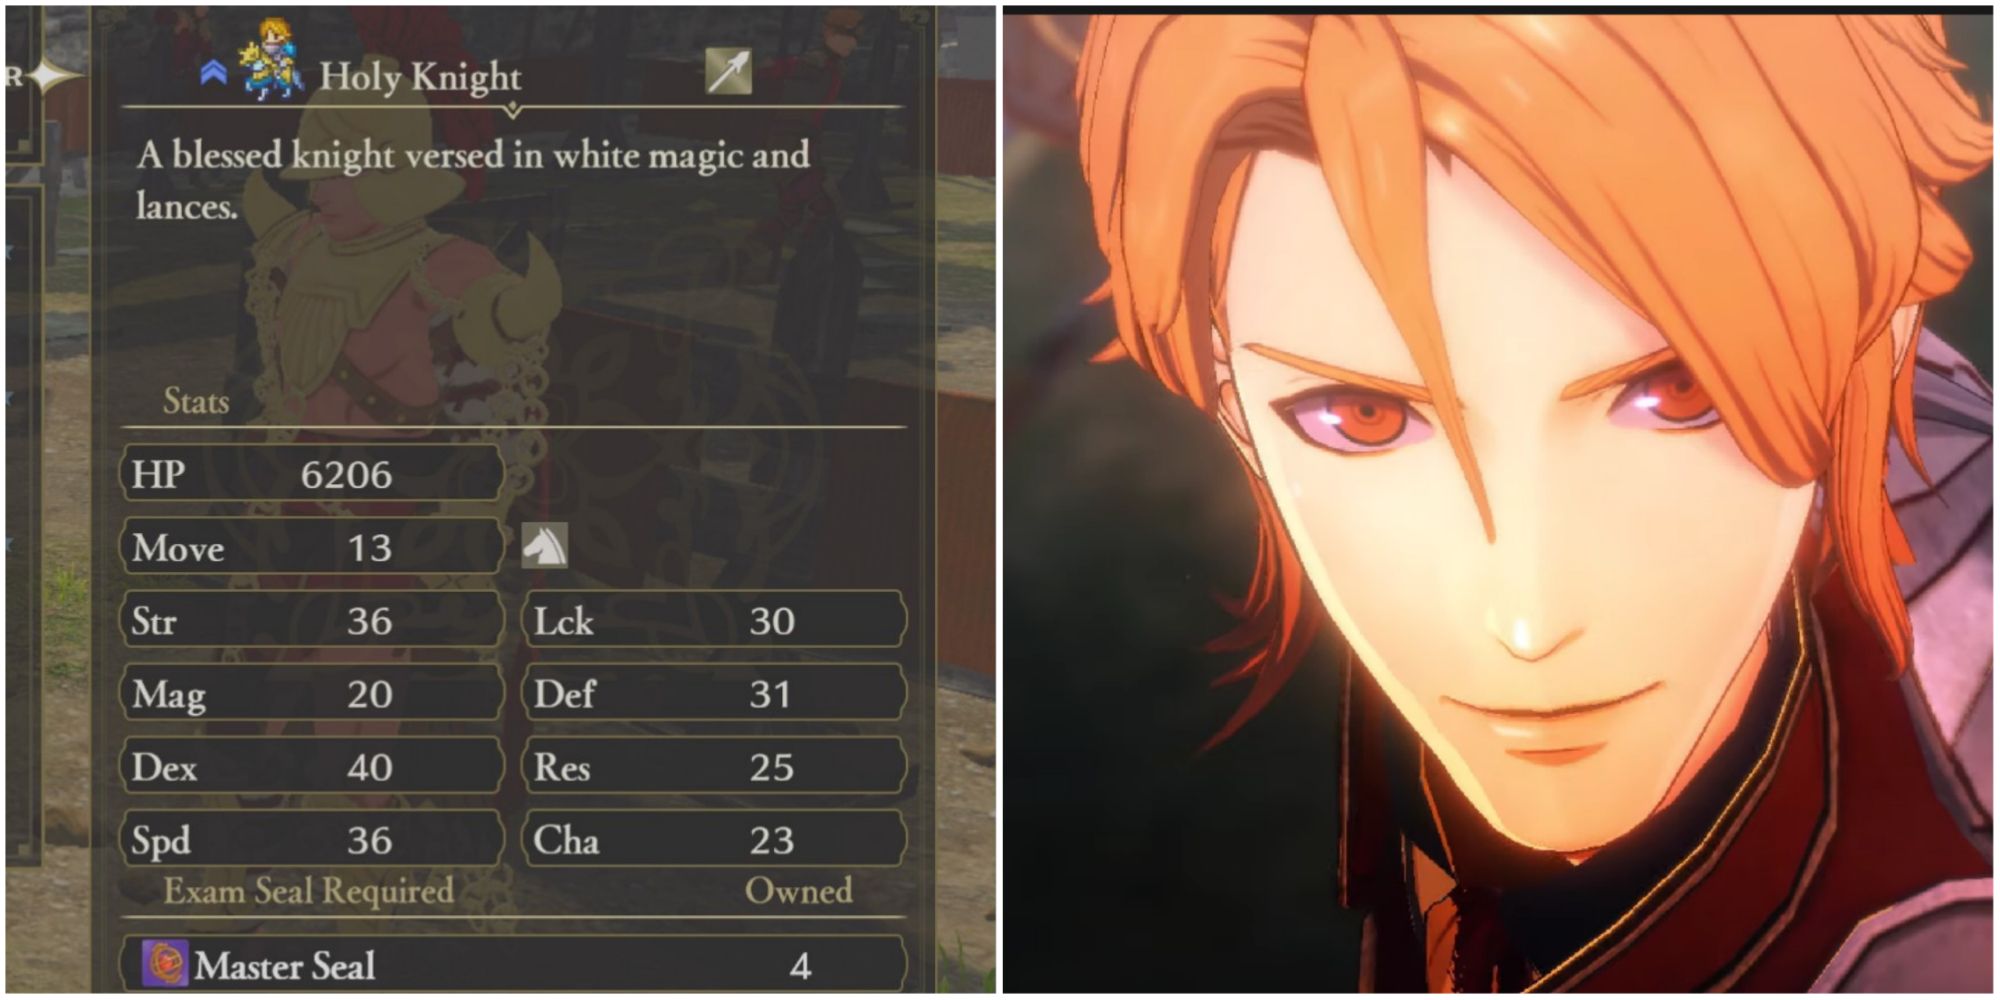 Split image of Holy Knight stat screen and Ferdinand